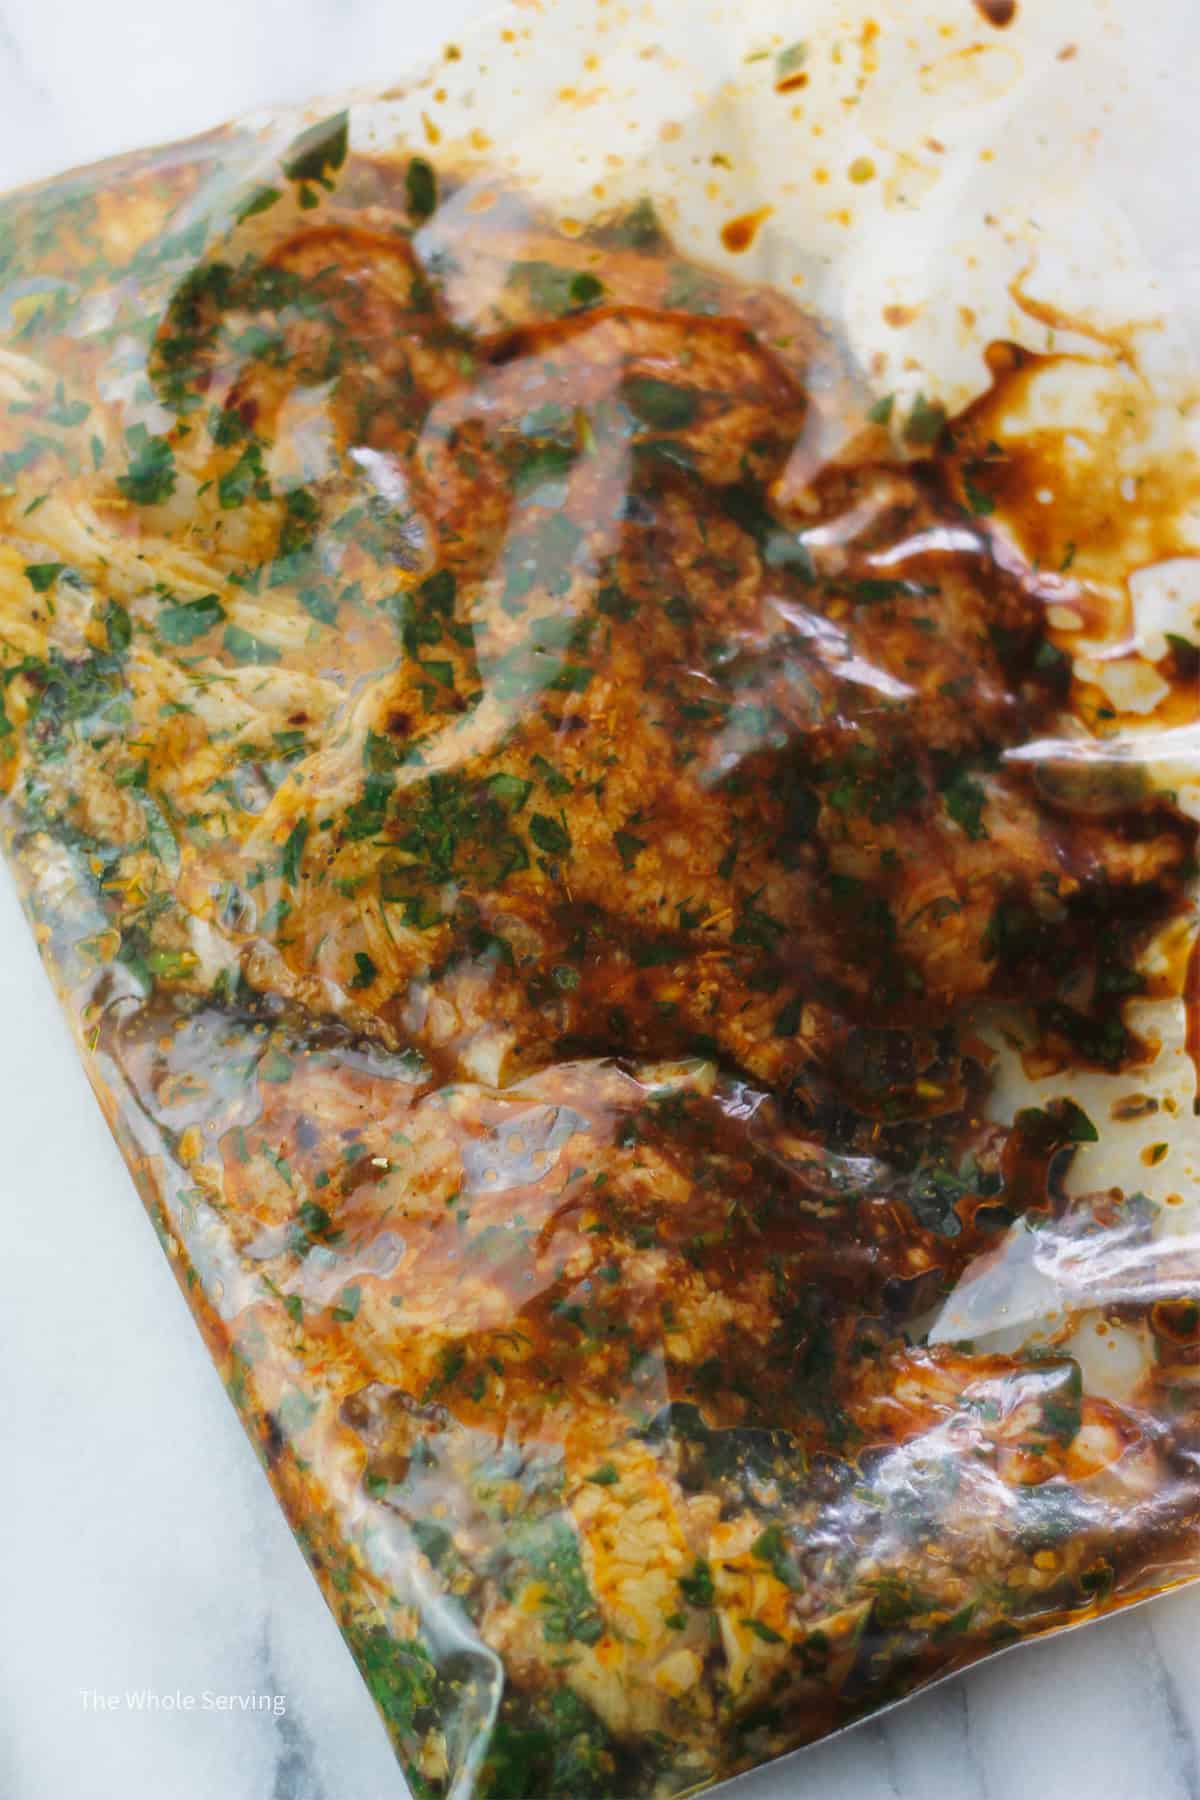 Chicken breast in a zip bag marinating in chimichurri chipotle sauce